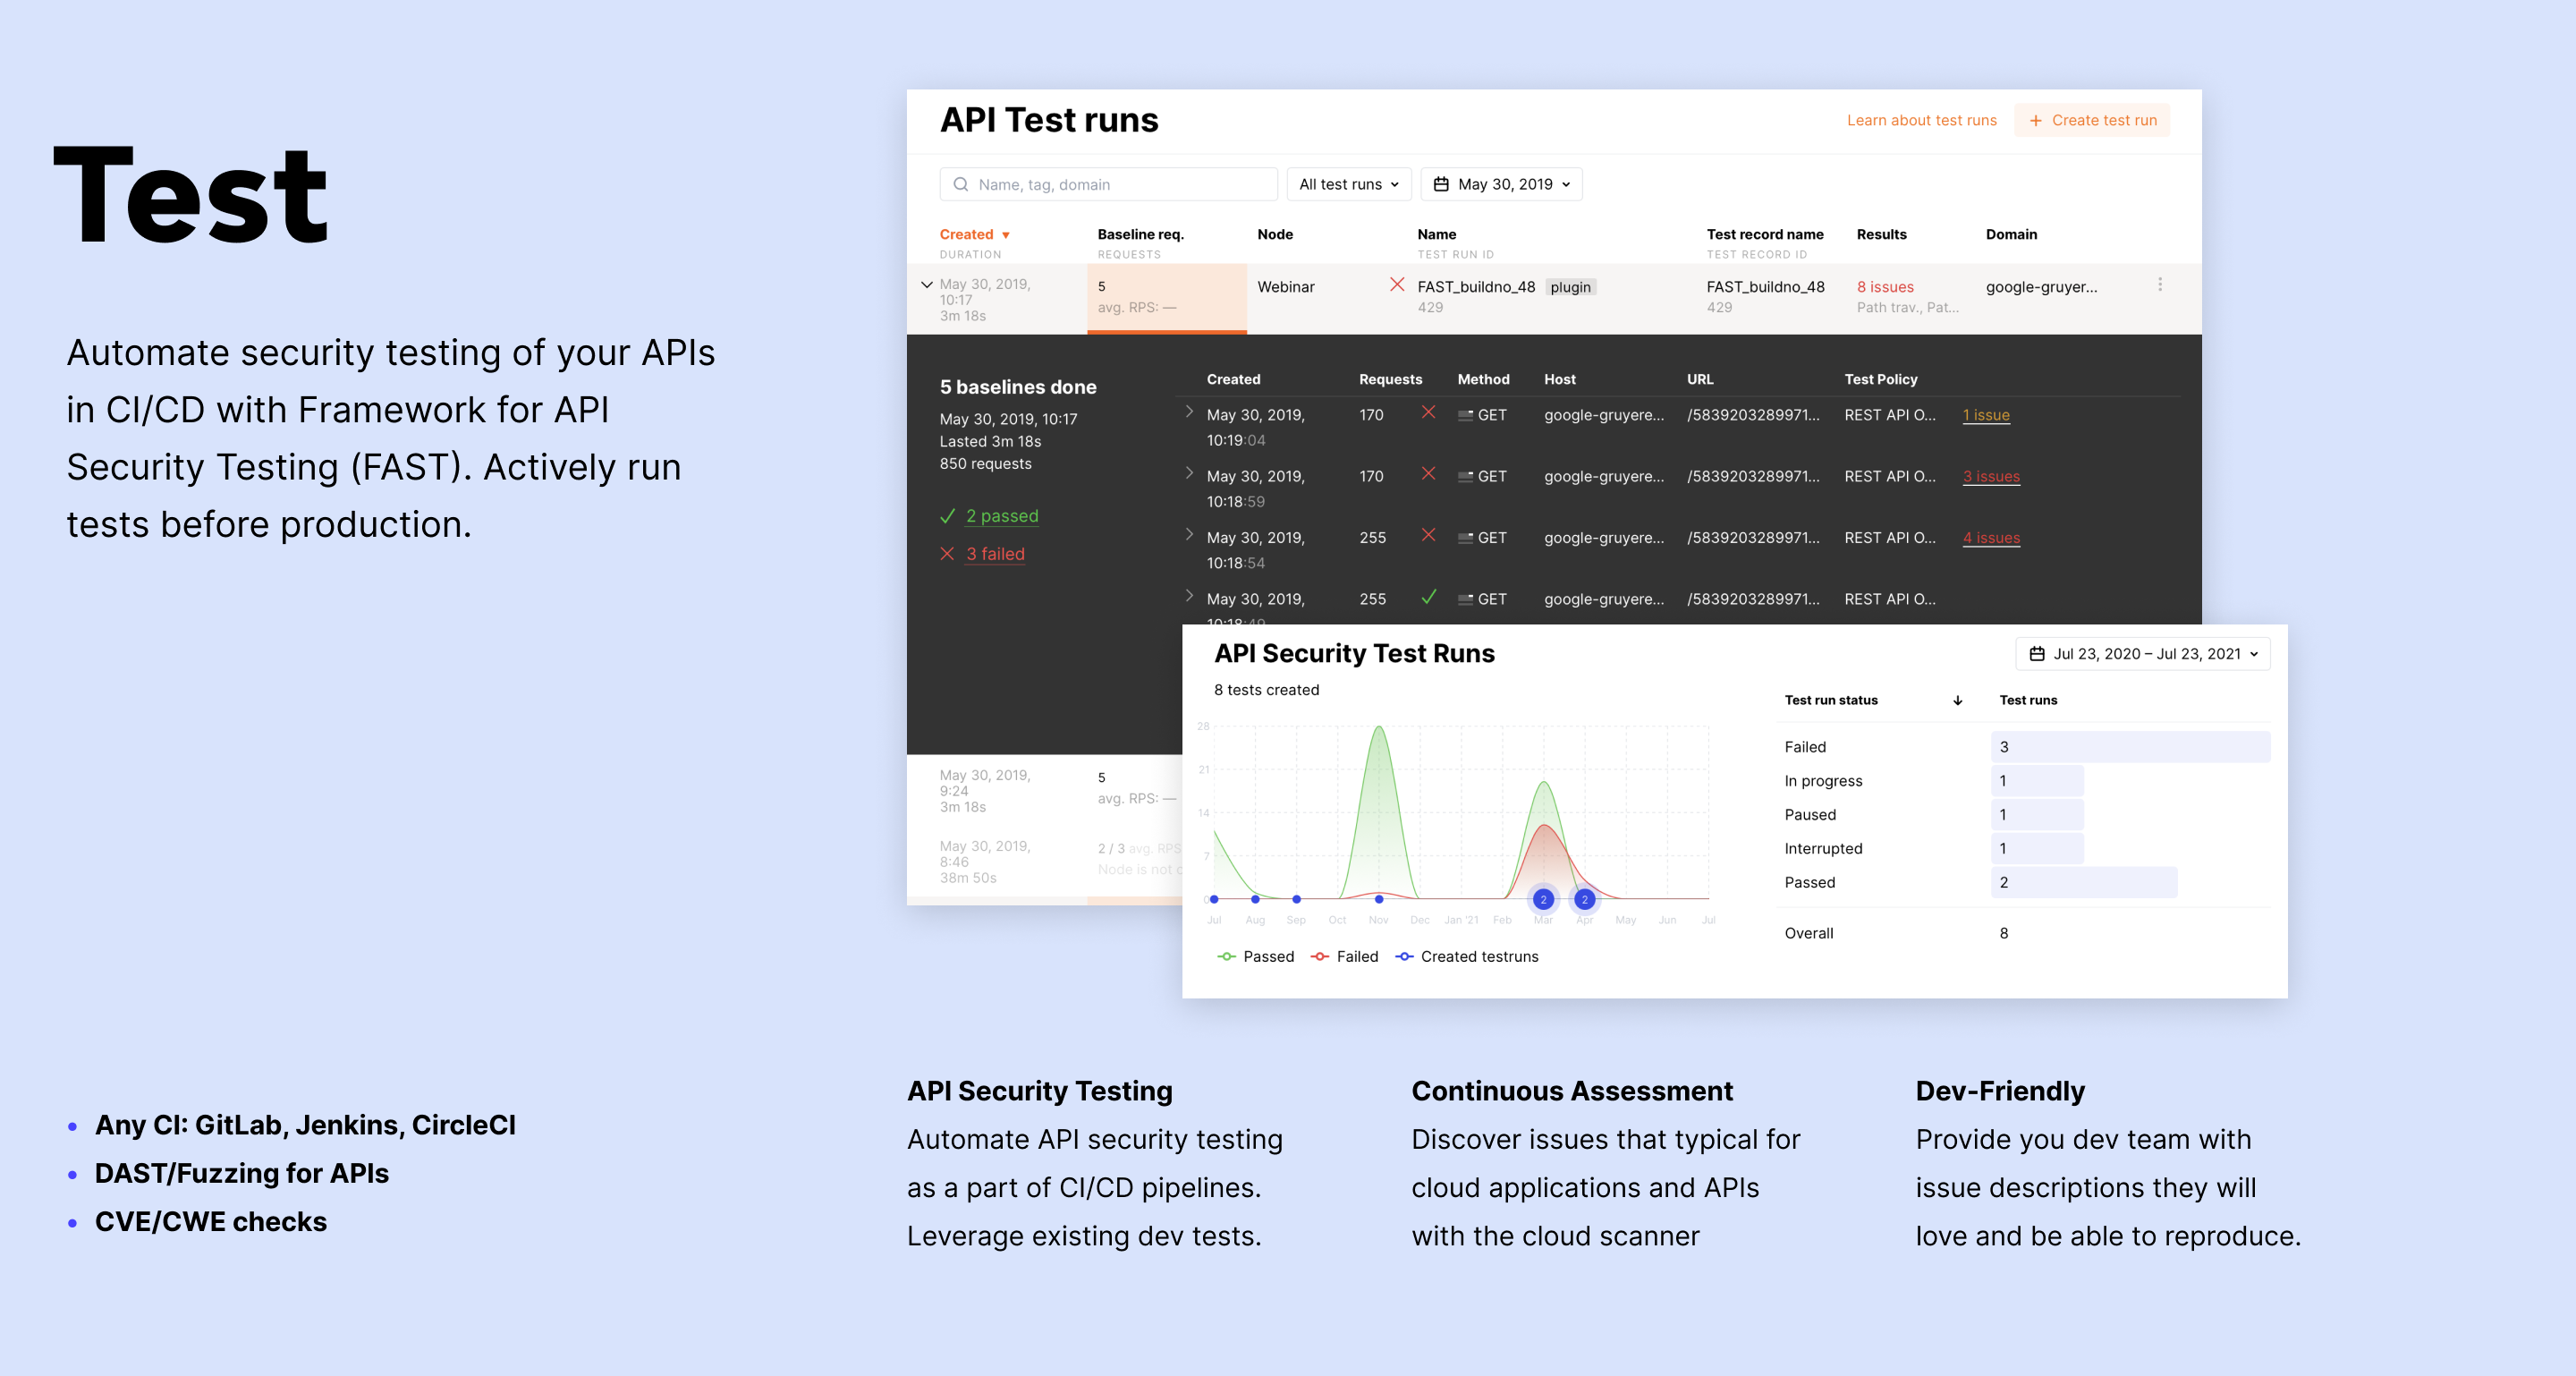 Wallarm WAF Software - Test. Automate security testing of your APIs in CI/CD with Framework for API Security Testing